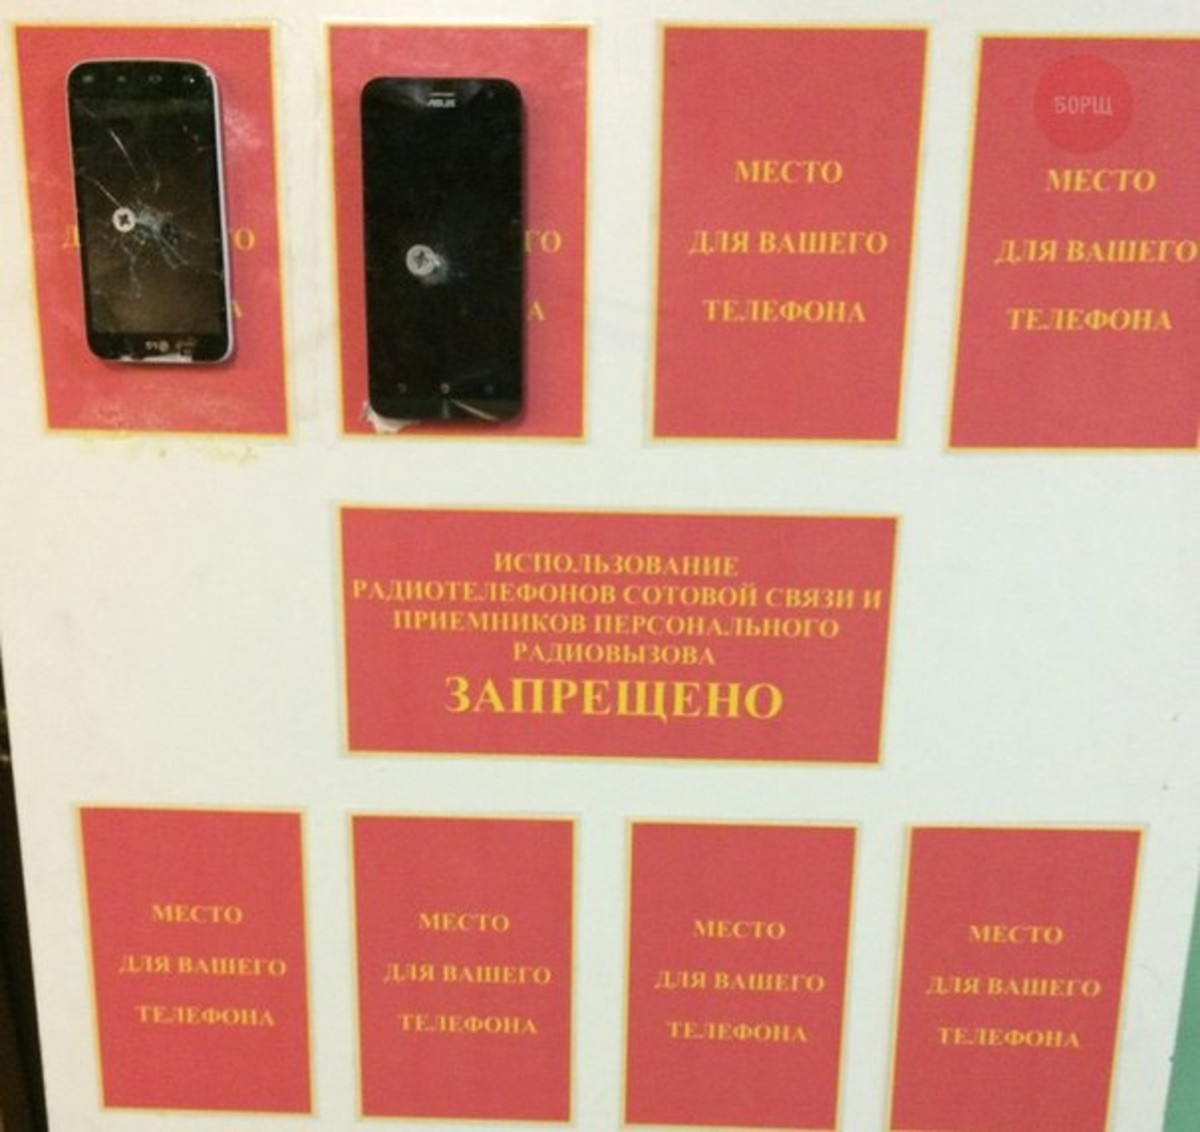 "Usage of radio emitting devices and personal receivers is FORBIDDEN" and with "Place for your telephone." Unfortunately for the Russians lack of secure communications meant they often used them anyway and promptly were listened in on 